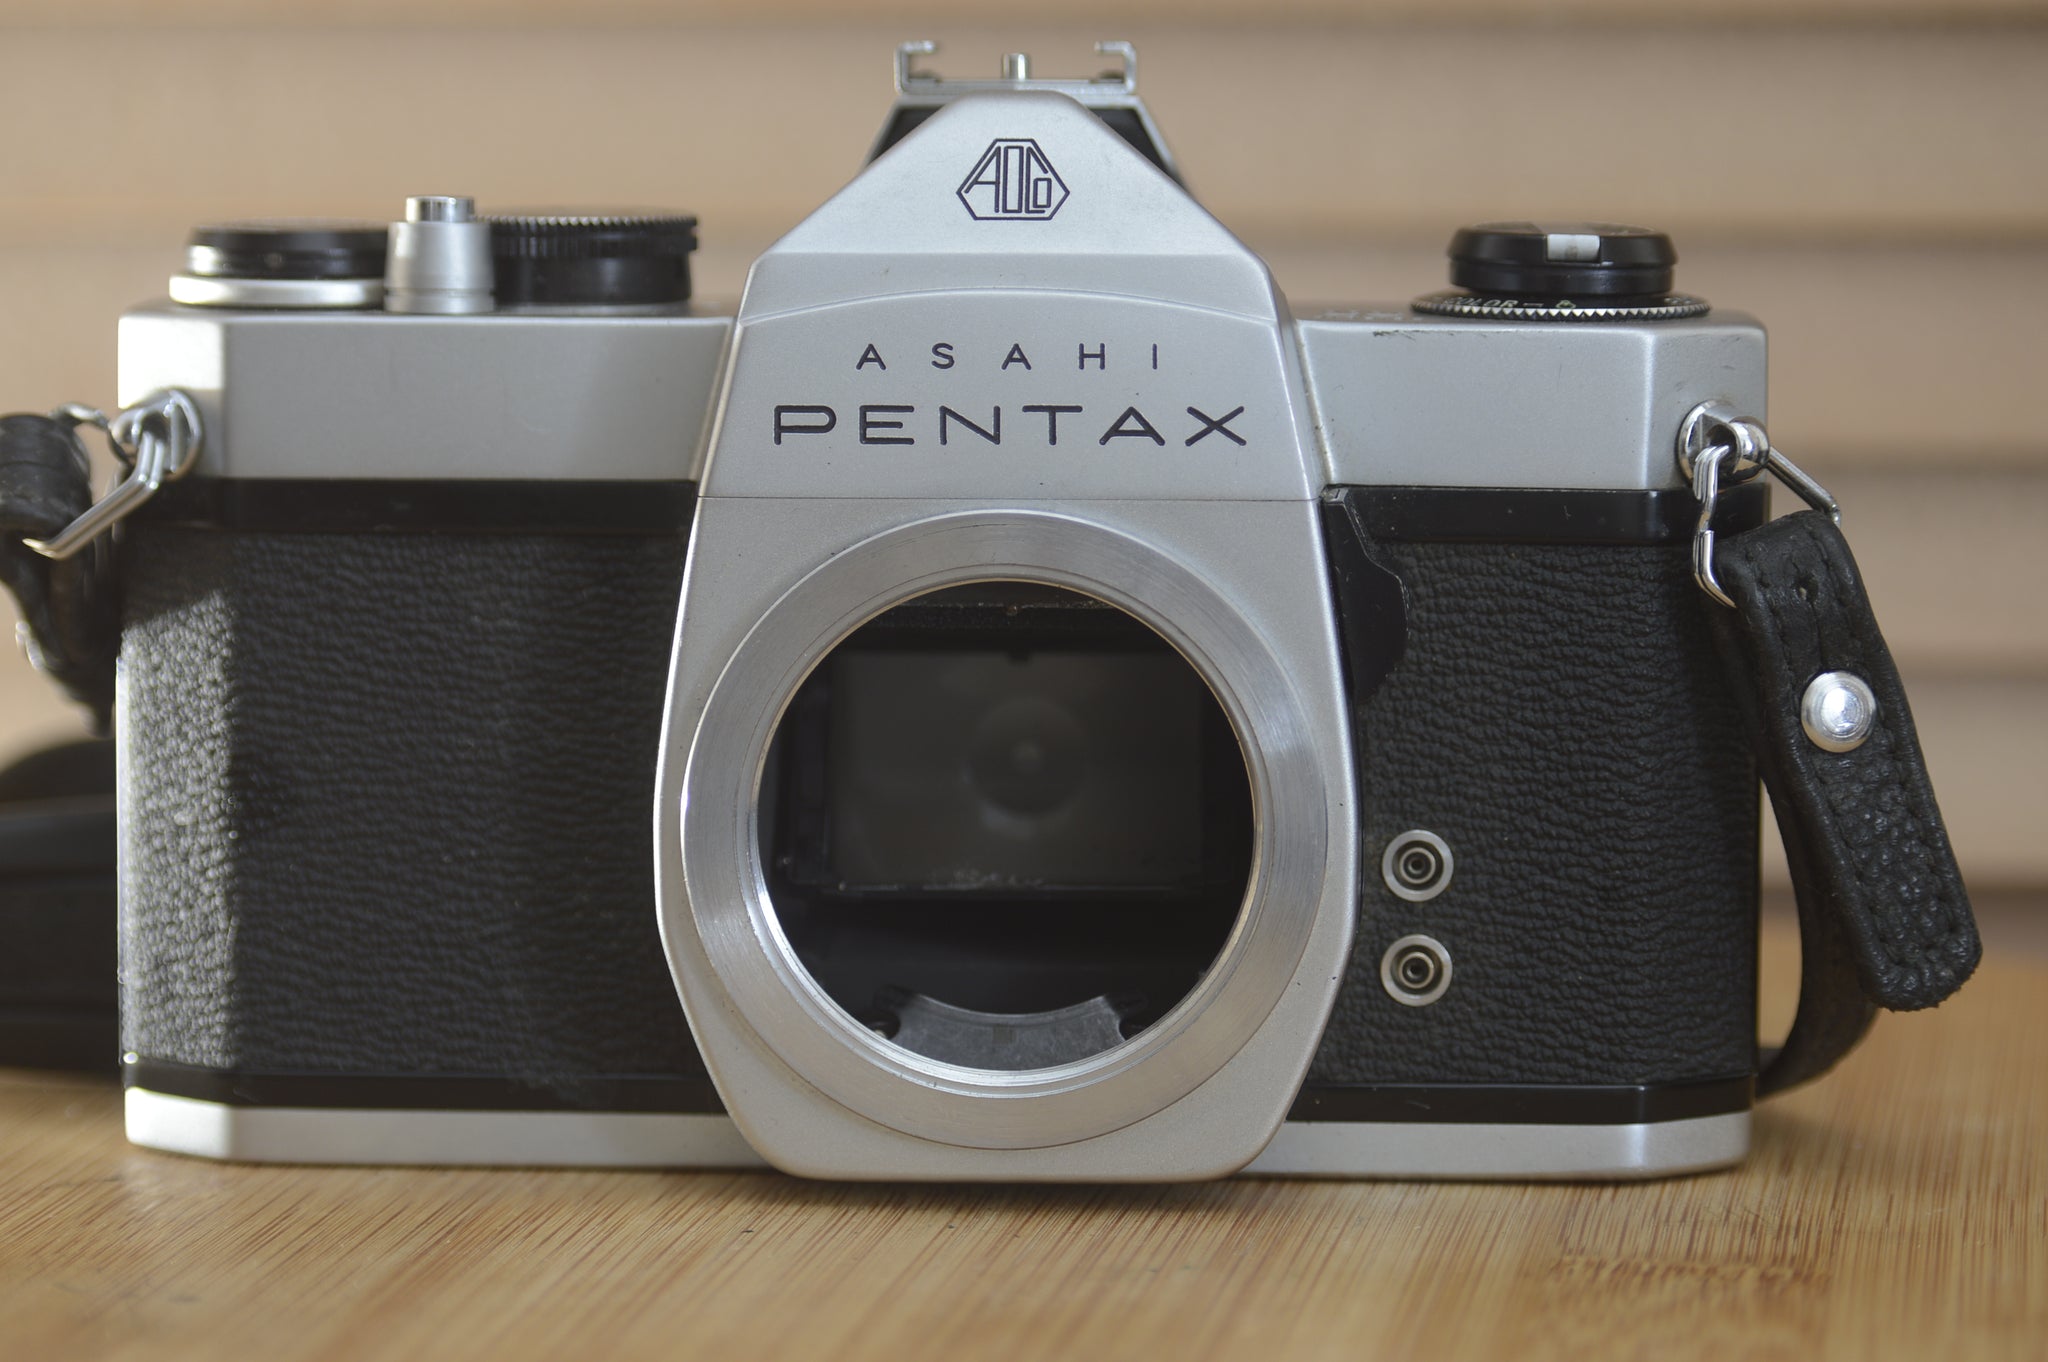 Asahi Spotmatic sp 1000 with strap. In near Mint condition. These are super collectable now, why not add one of our M42 lenses? - RewindCameras quality vintage cameras, fully tested and servi